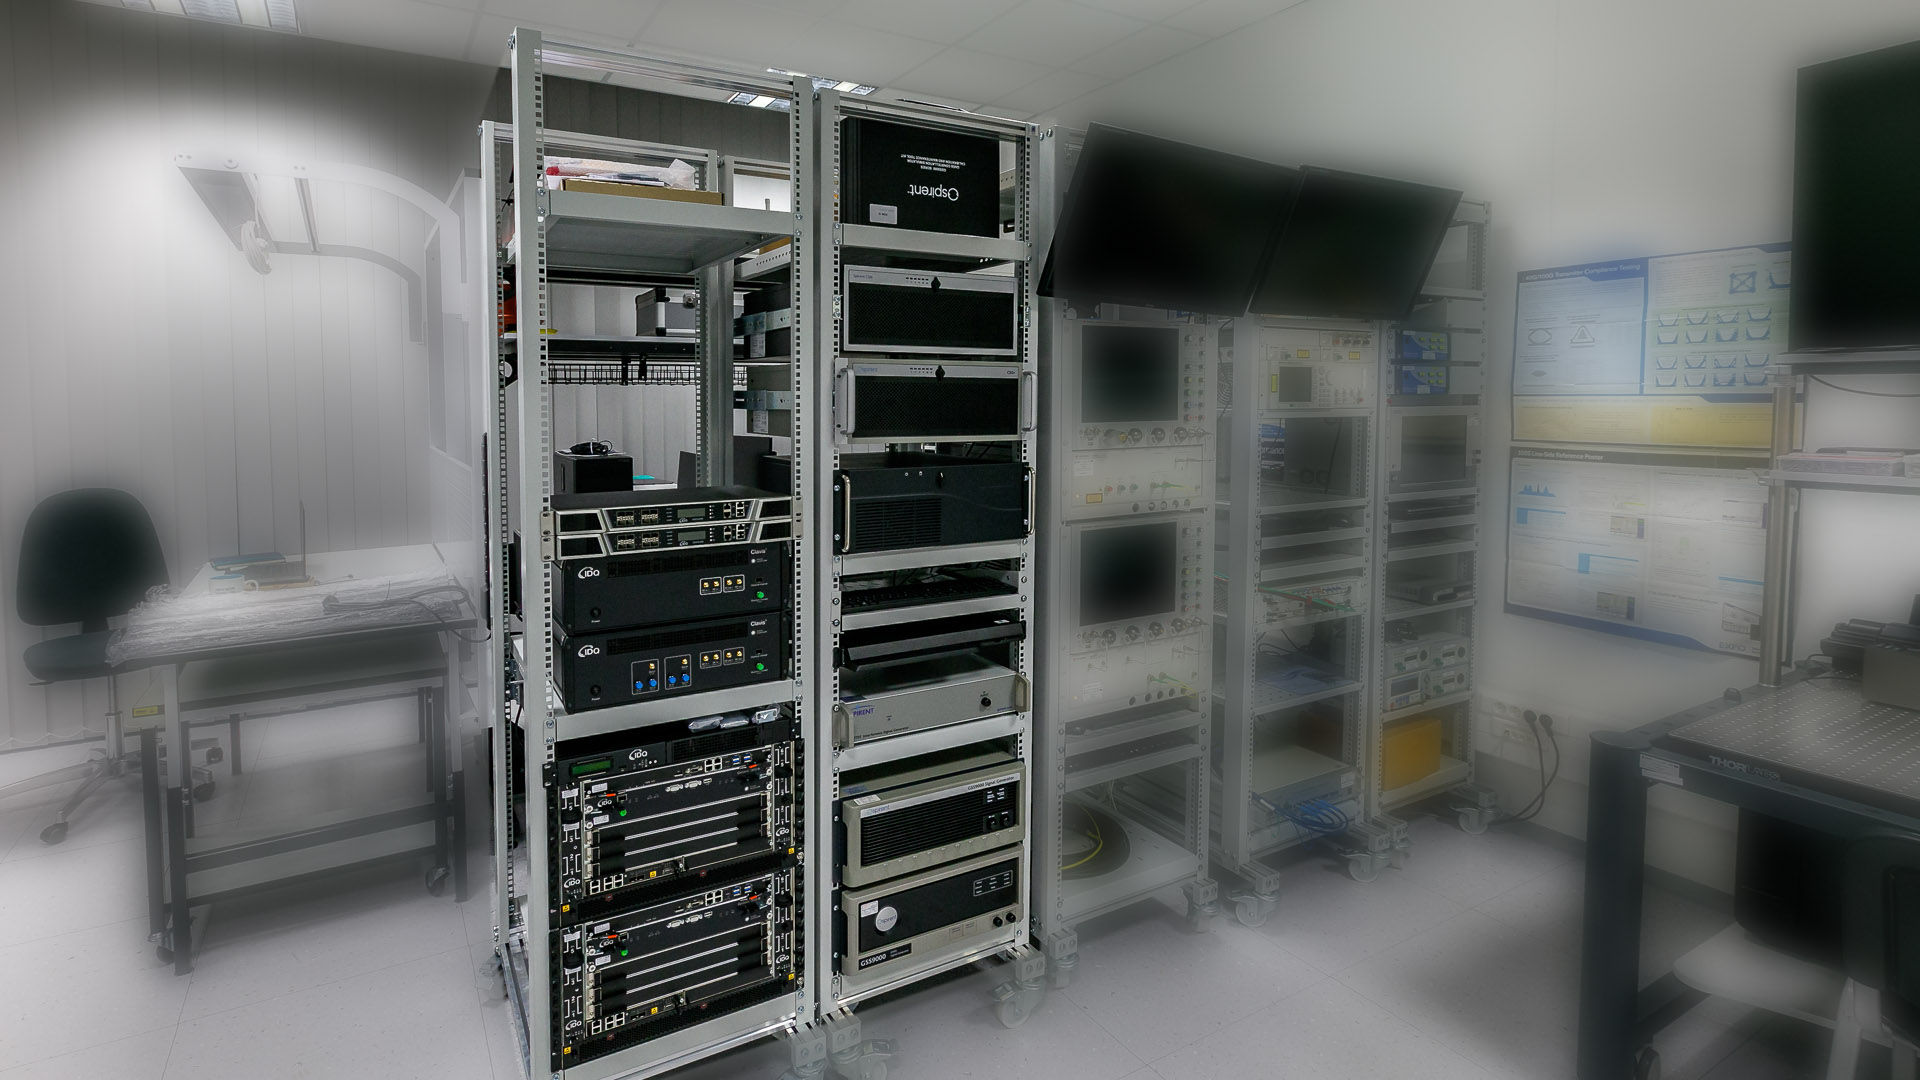 NLPQT project: the laboratory was equipped with a system for advanced modeling and simulation of GNSS signals/systems